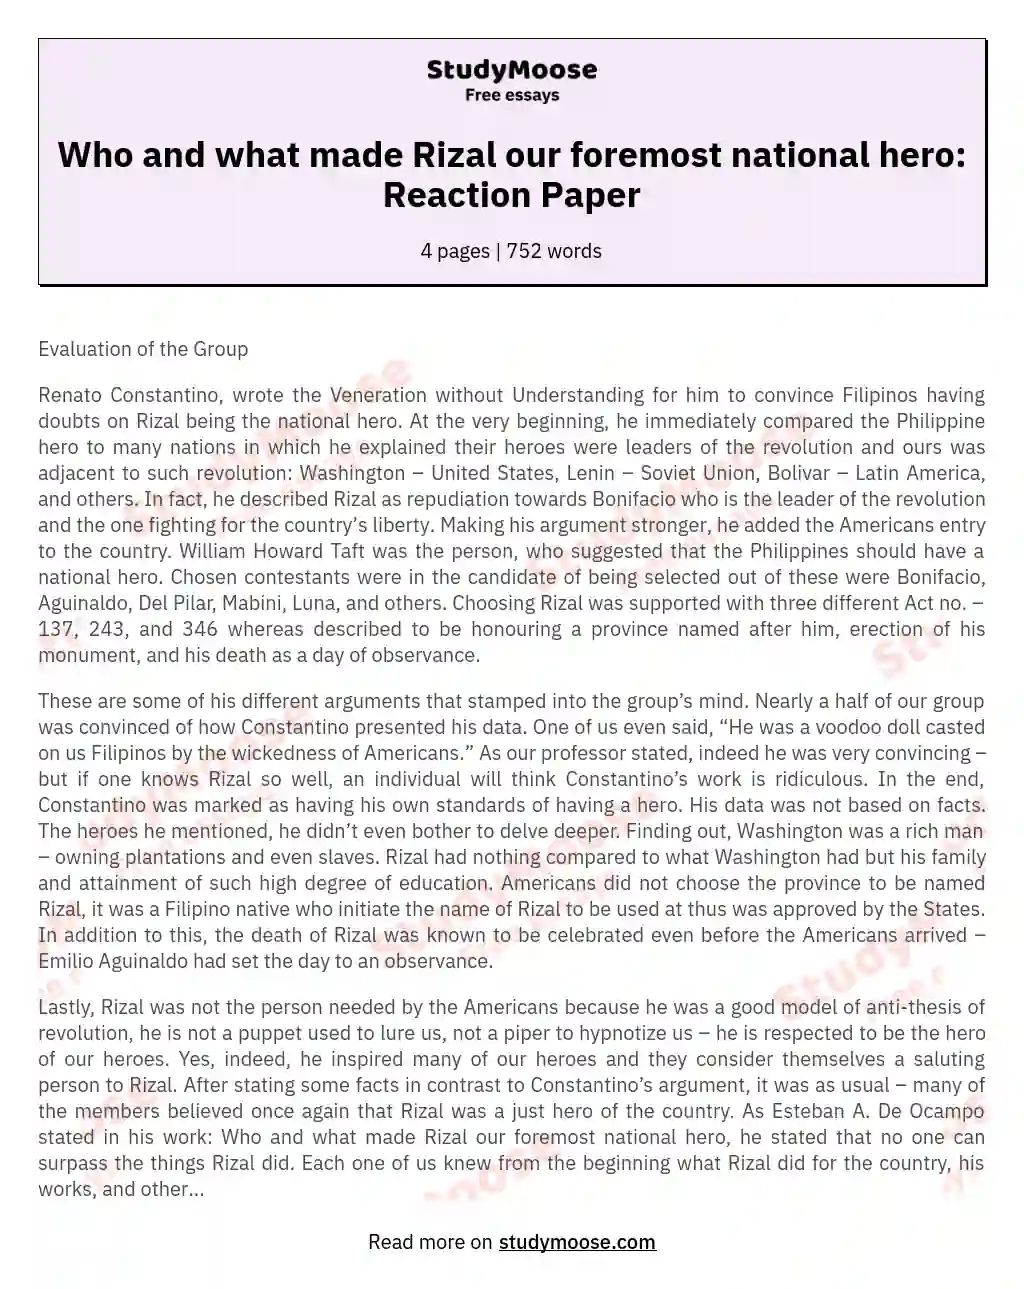 Who and what made Rizal our foremost national hero: Reaction Paper essay